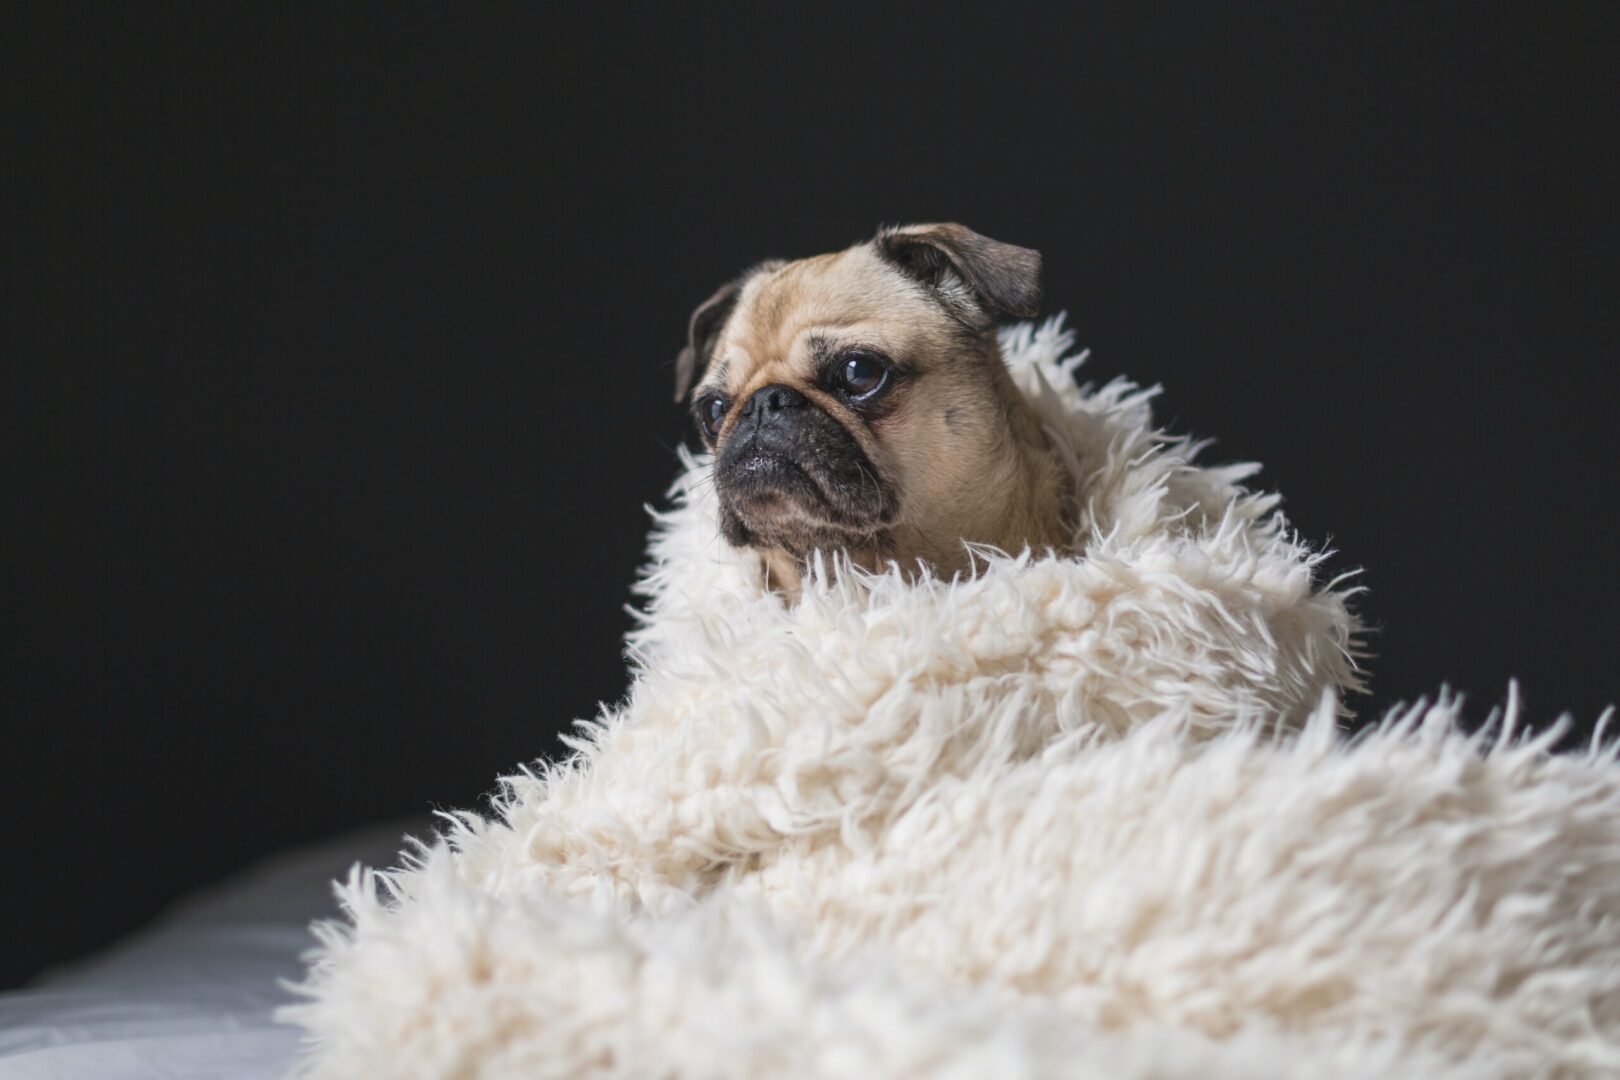 A pug dog wrapped in a blanket on a bed.